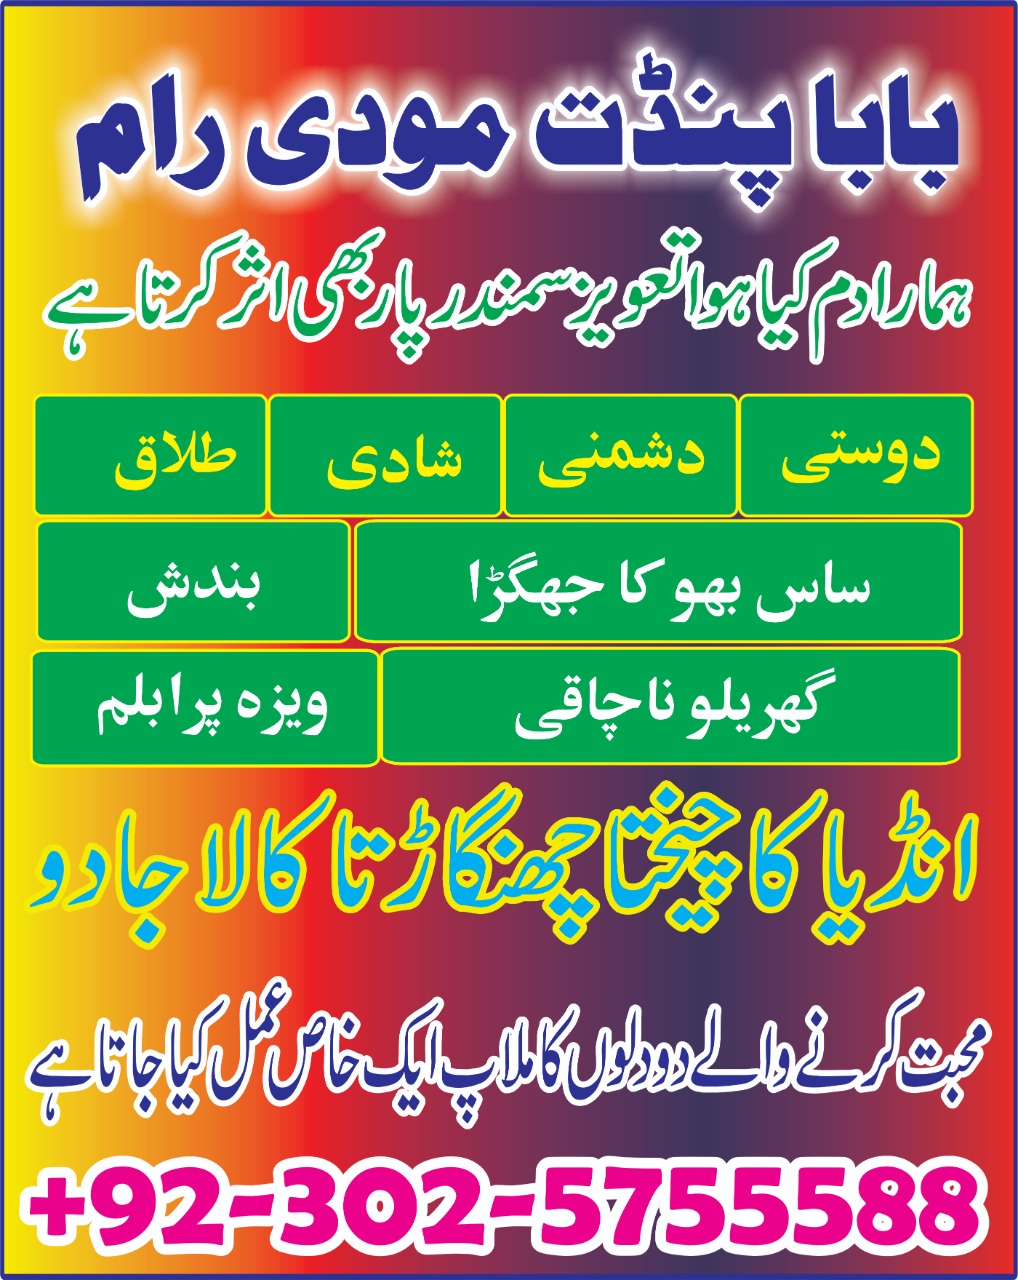 amil baba black magic specialist in lahore islamabad